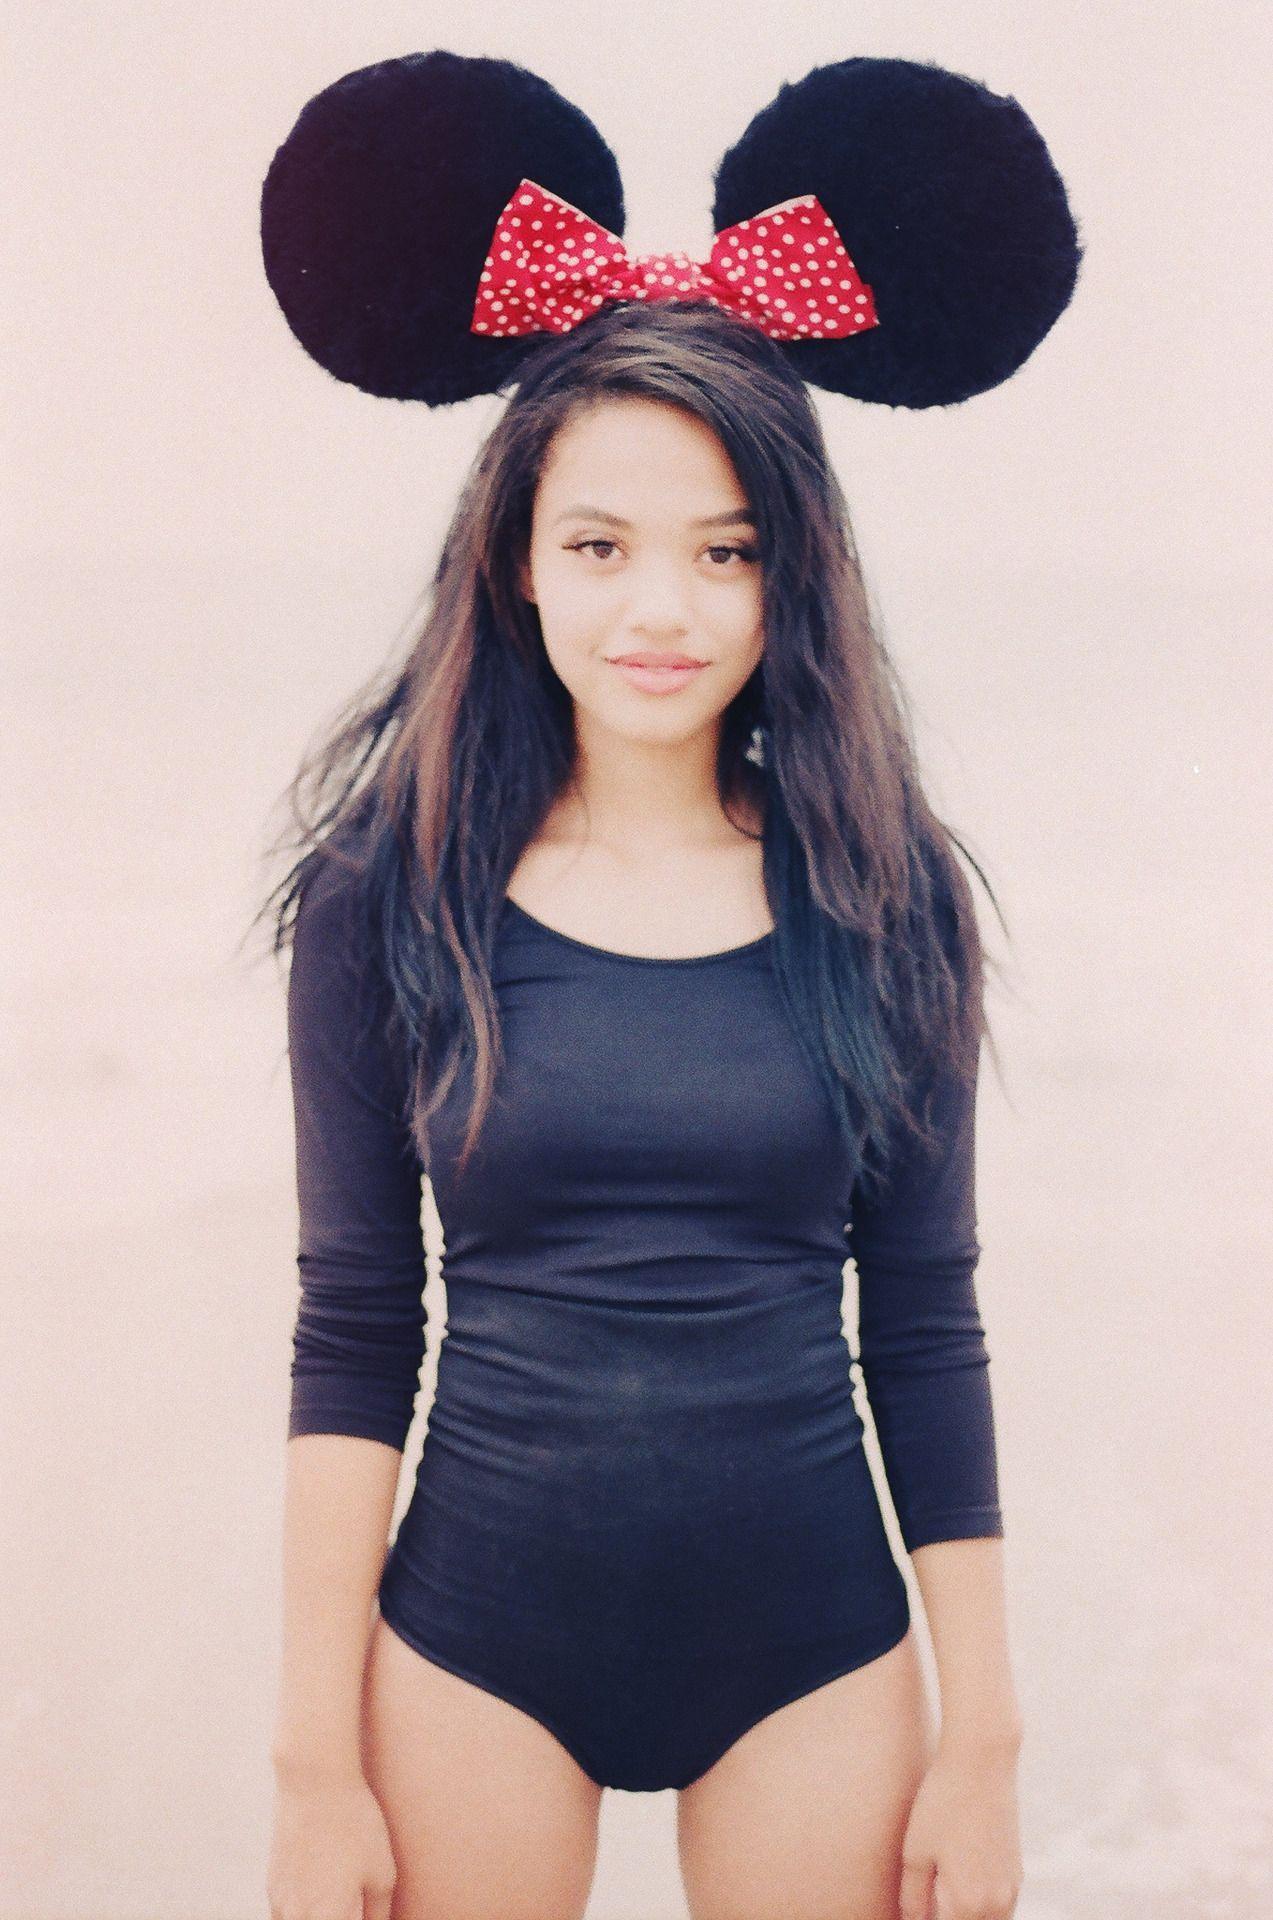 Kiersey Clemons as Minnie Mouse photographed